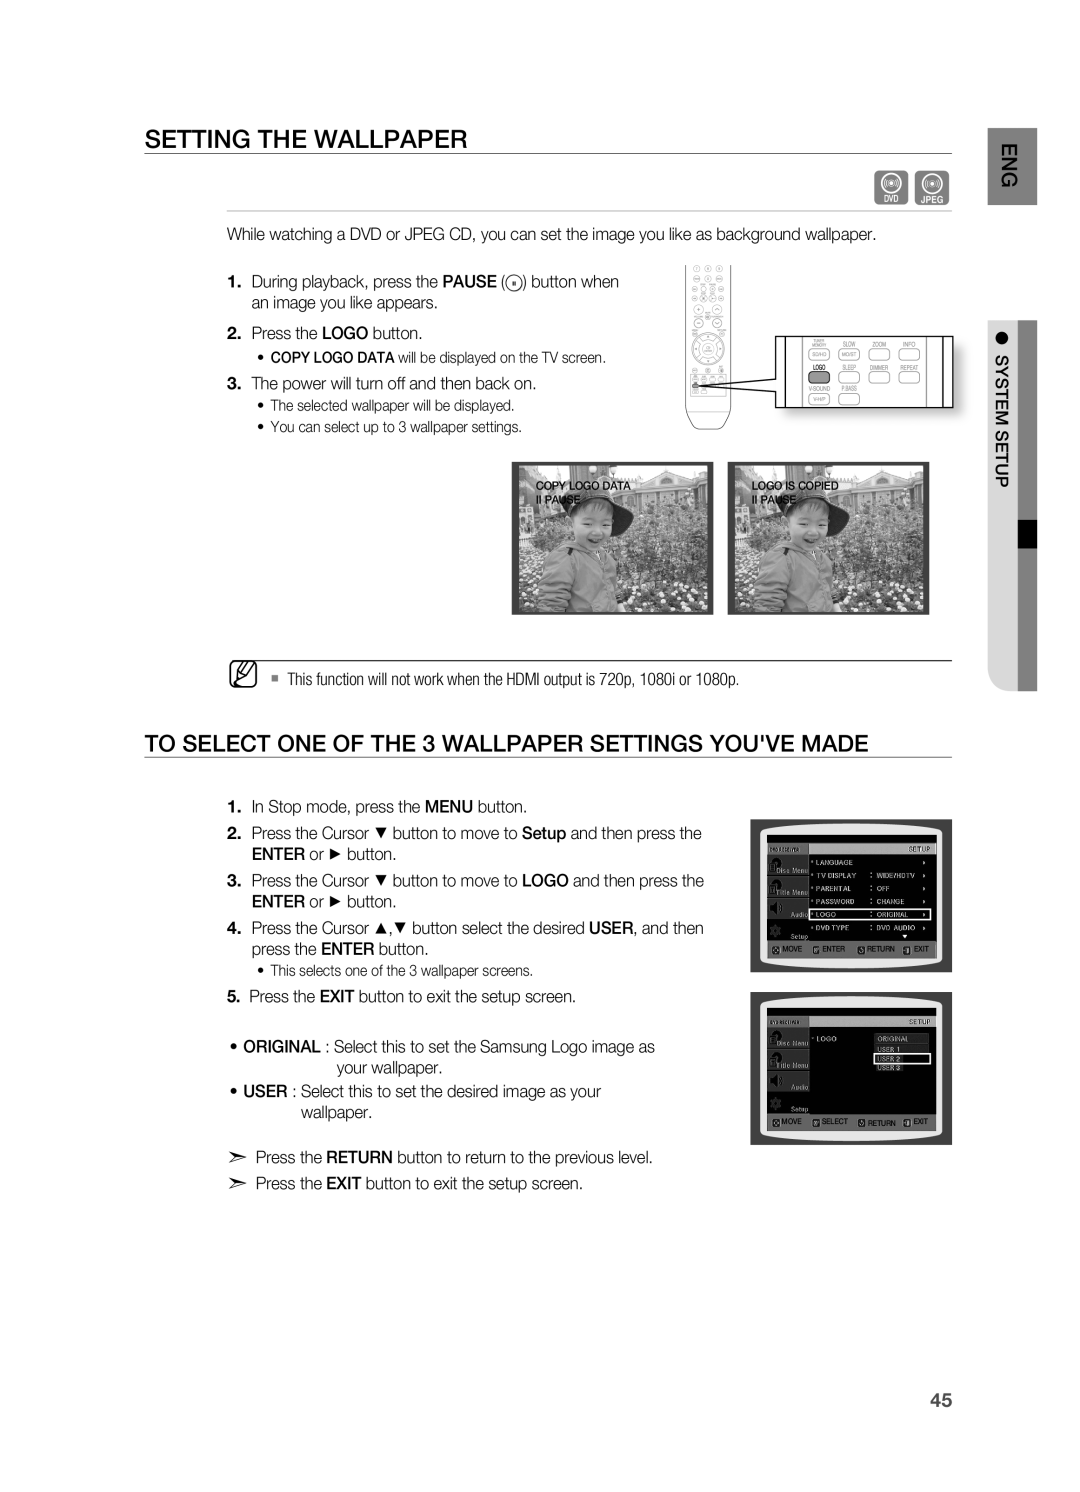 Samsung HT-A100 user manual SETTINg THE WAllPAPEr 